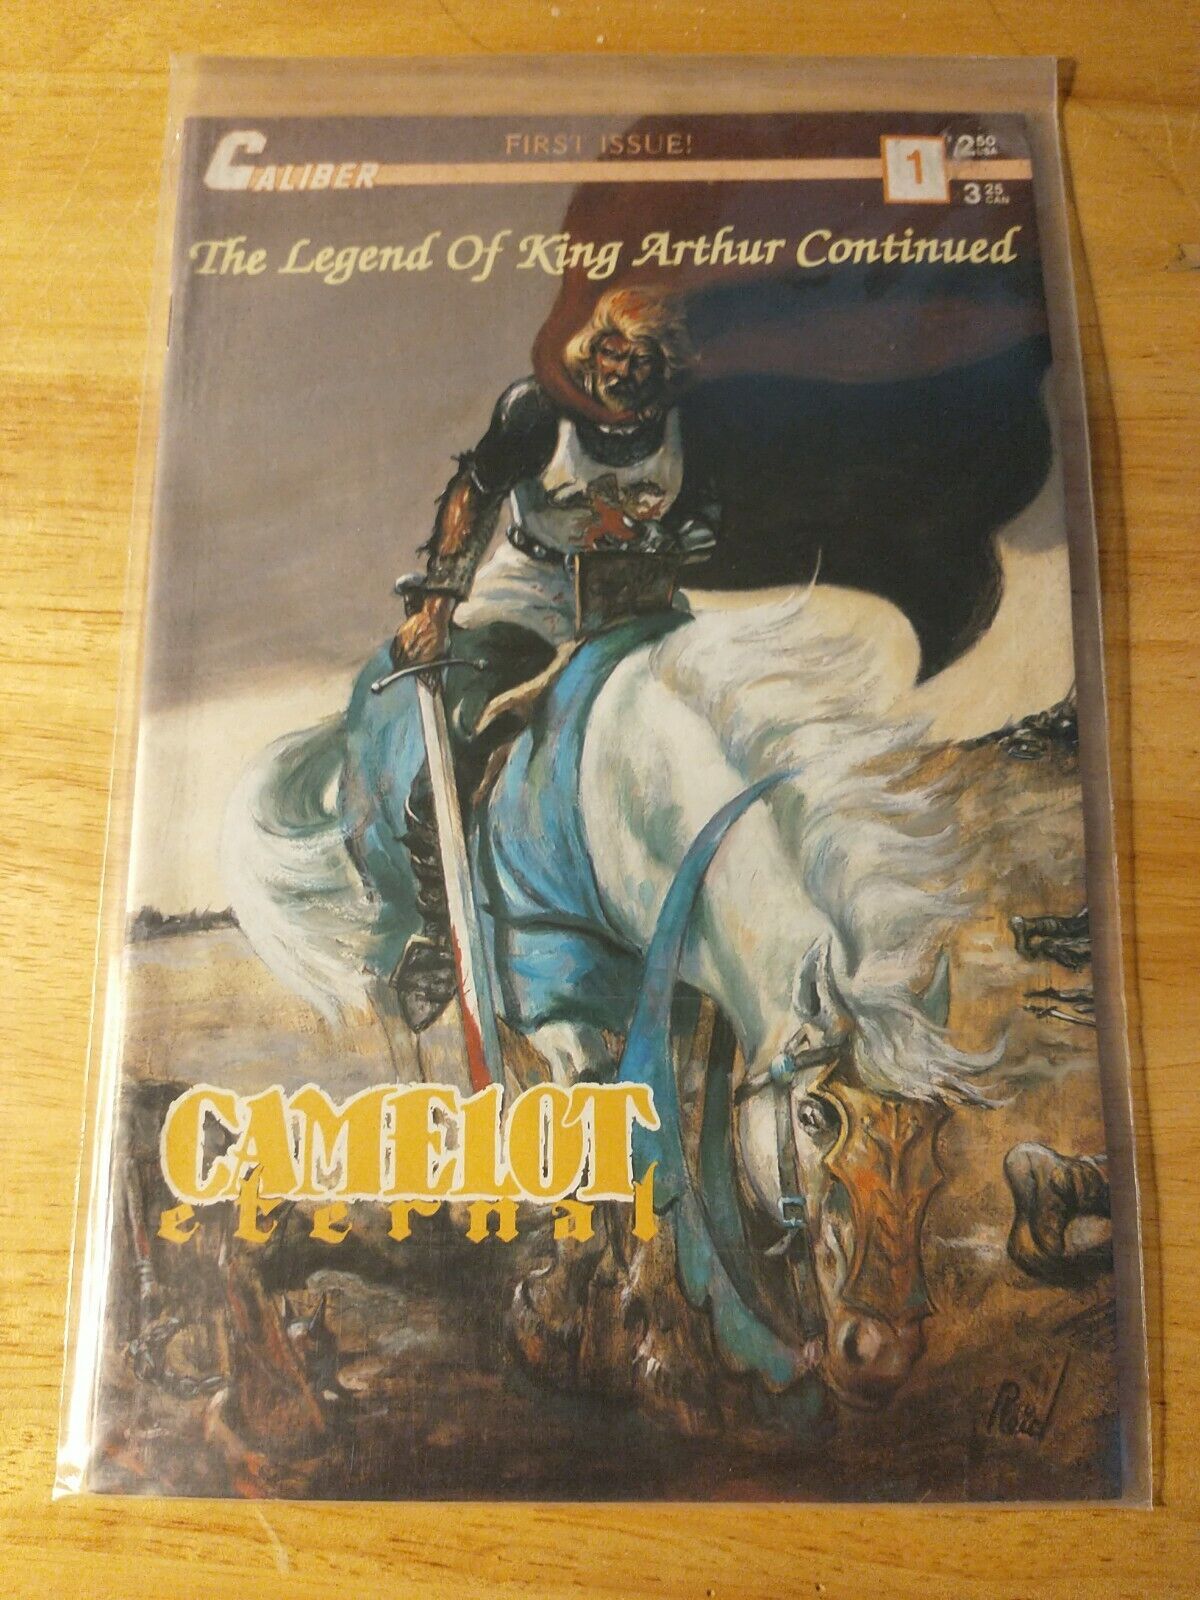 The Legend of King Arthur Continued#1 Caliber, First Issue